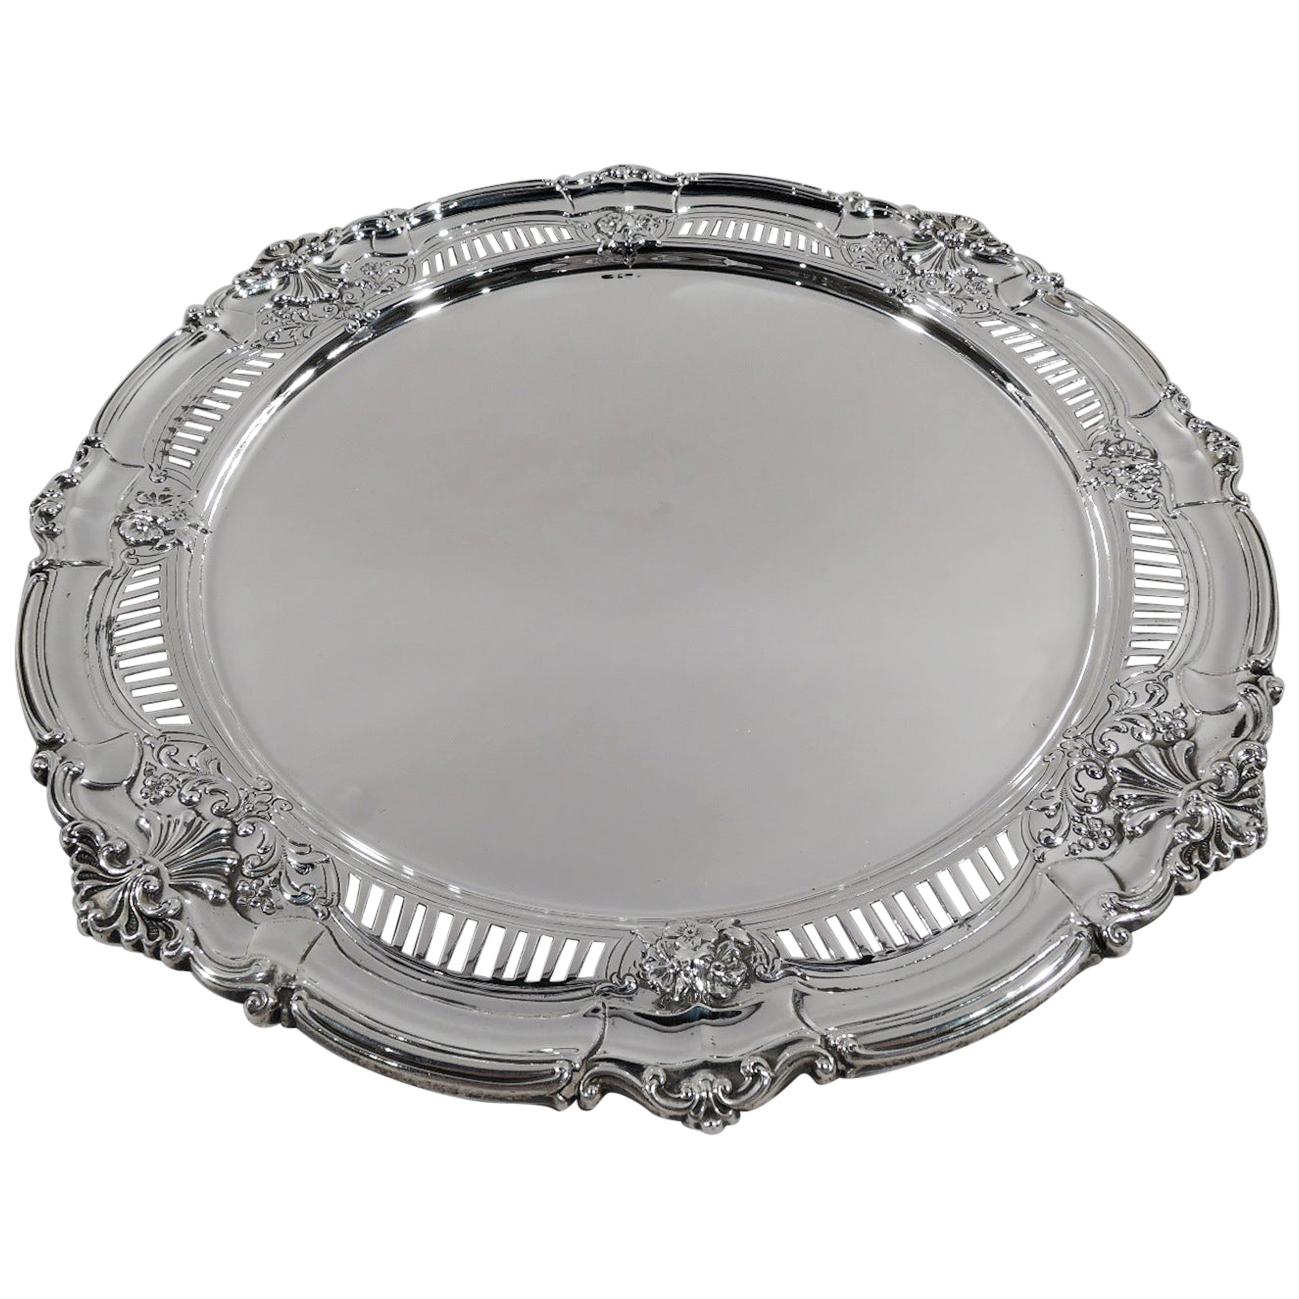 Antique American Edwardian Sterling Silver Cake Plate